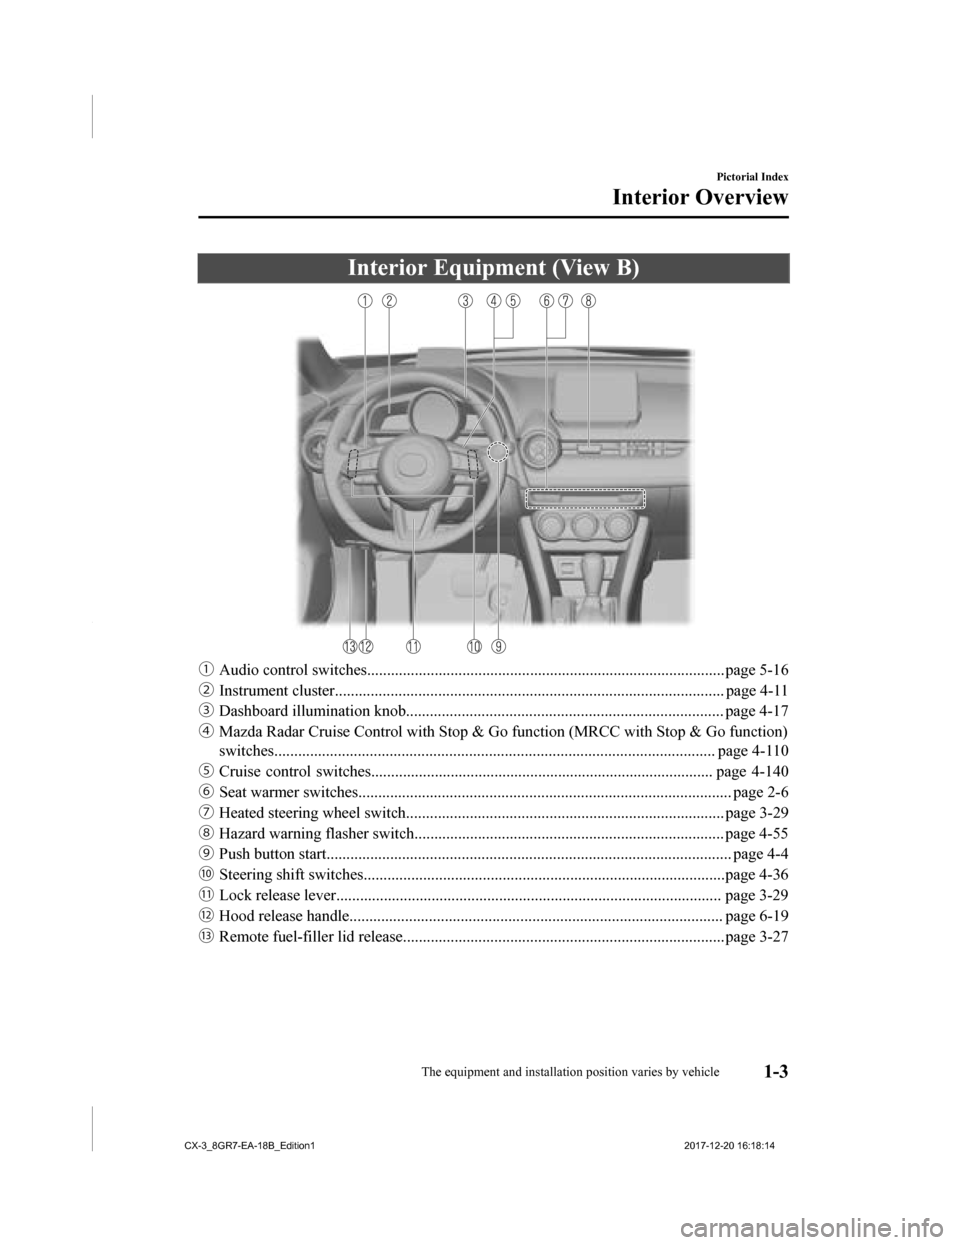 MAZDA MODEL CX-3 2019  Owners Manual (in English) Interior Equipment (View B)
ƒAudio control switches......................................... .................................................page 5-16
„ Instrument cluster.......................